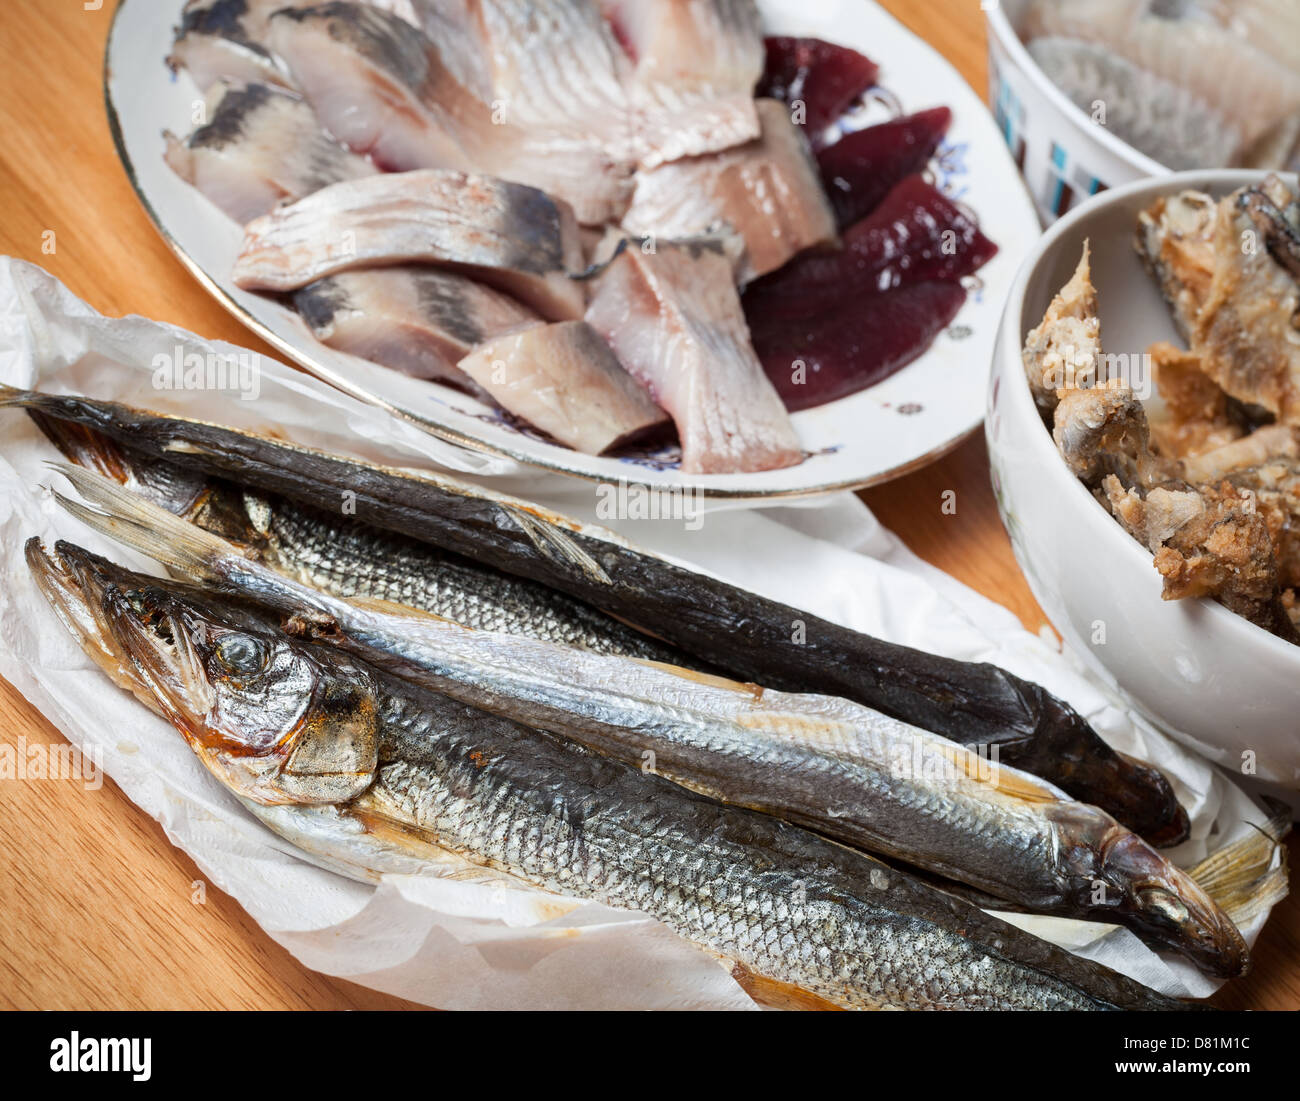 Assorted fish on wooden table. Seafood theme Stock Photo